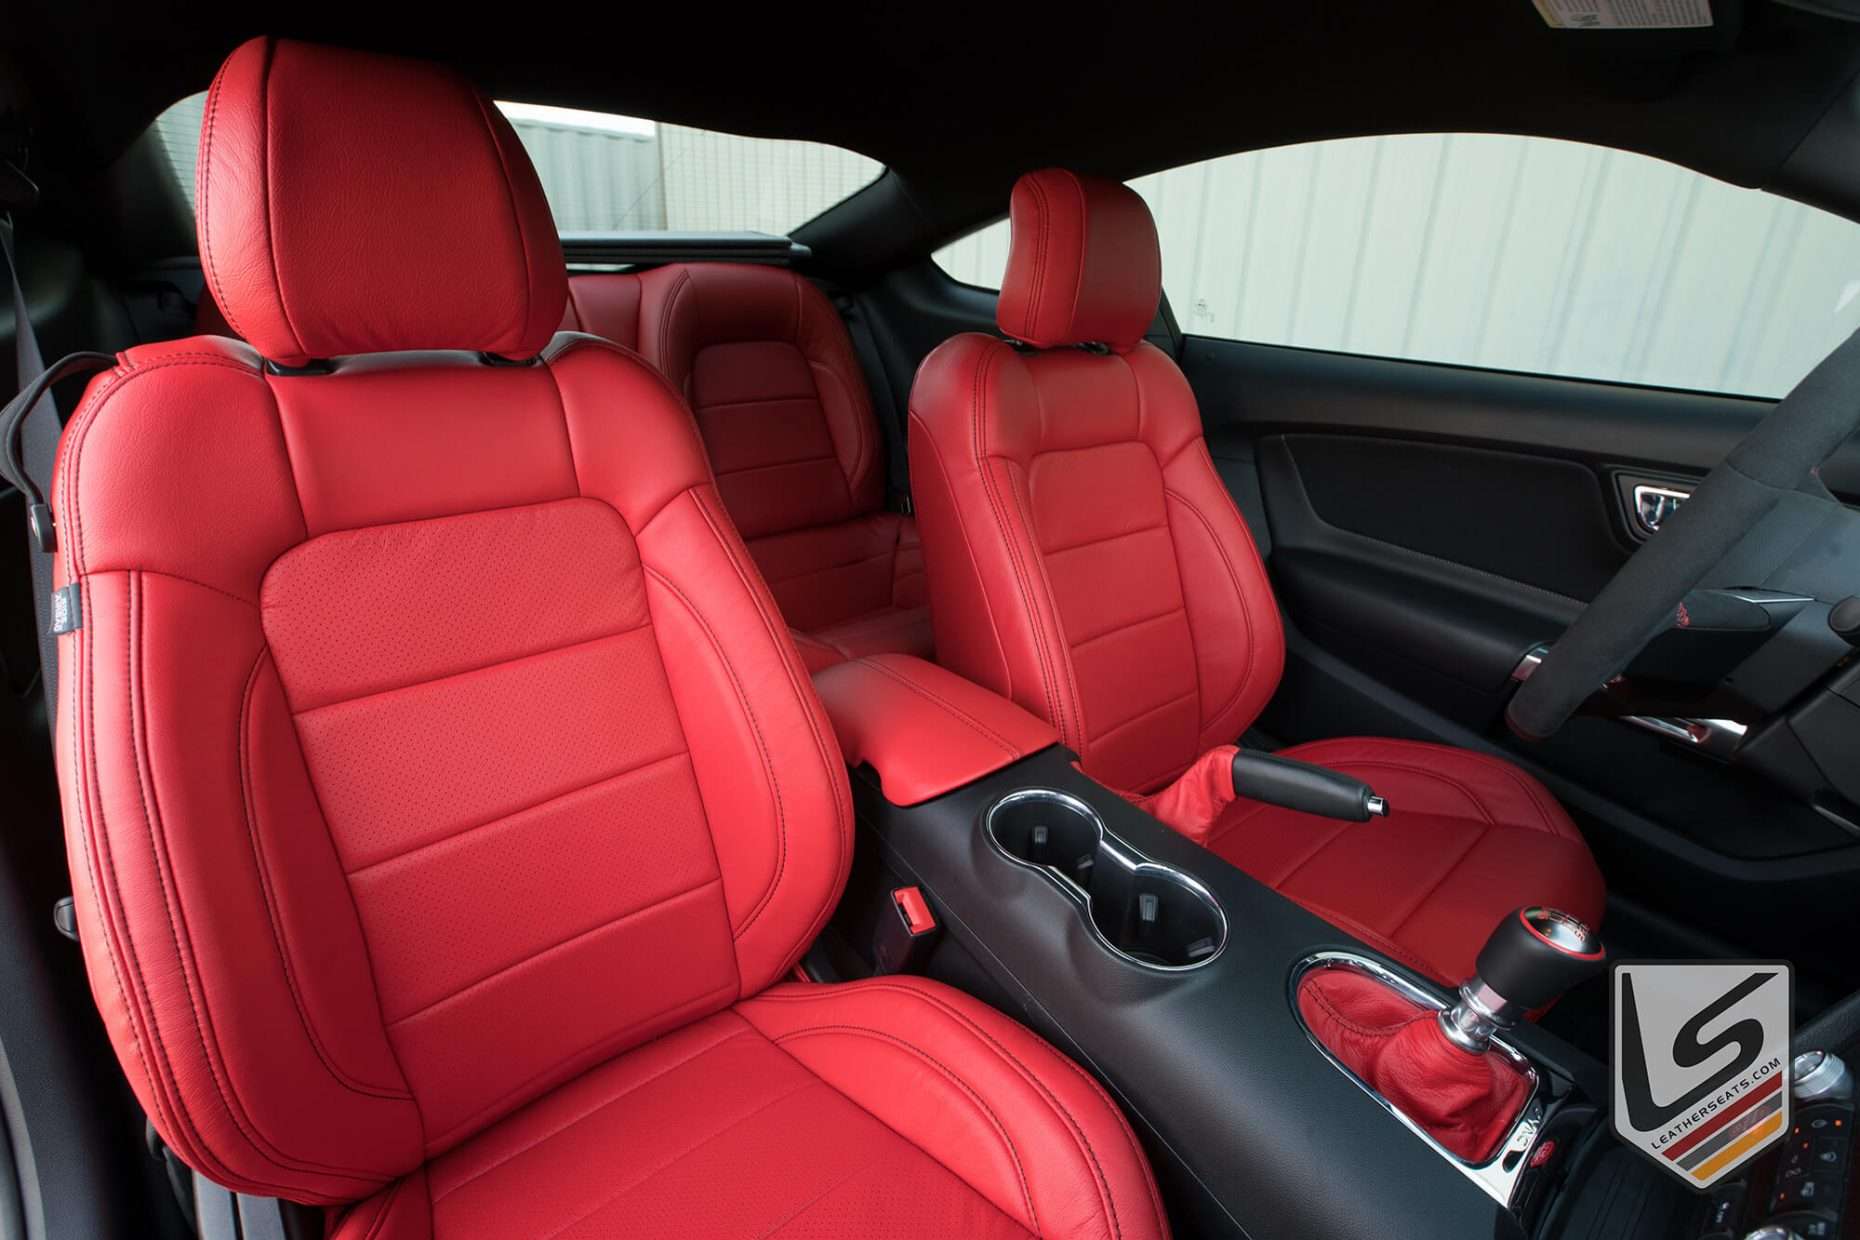 Front backrest and headrest section of Bright Red Ford Mustang seats